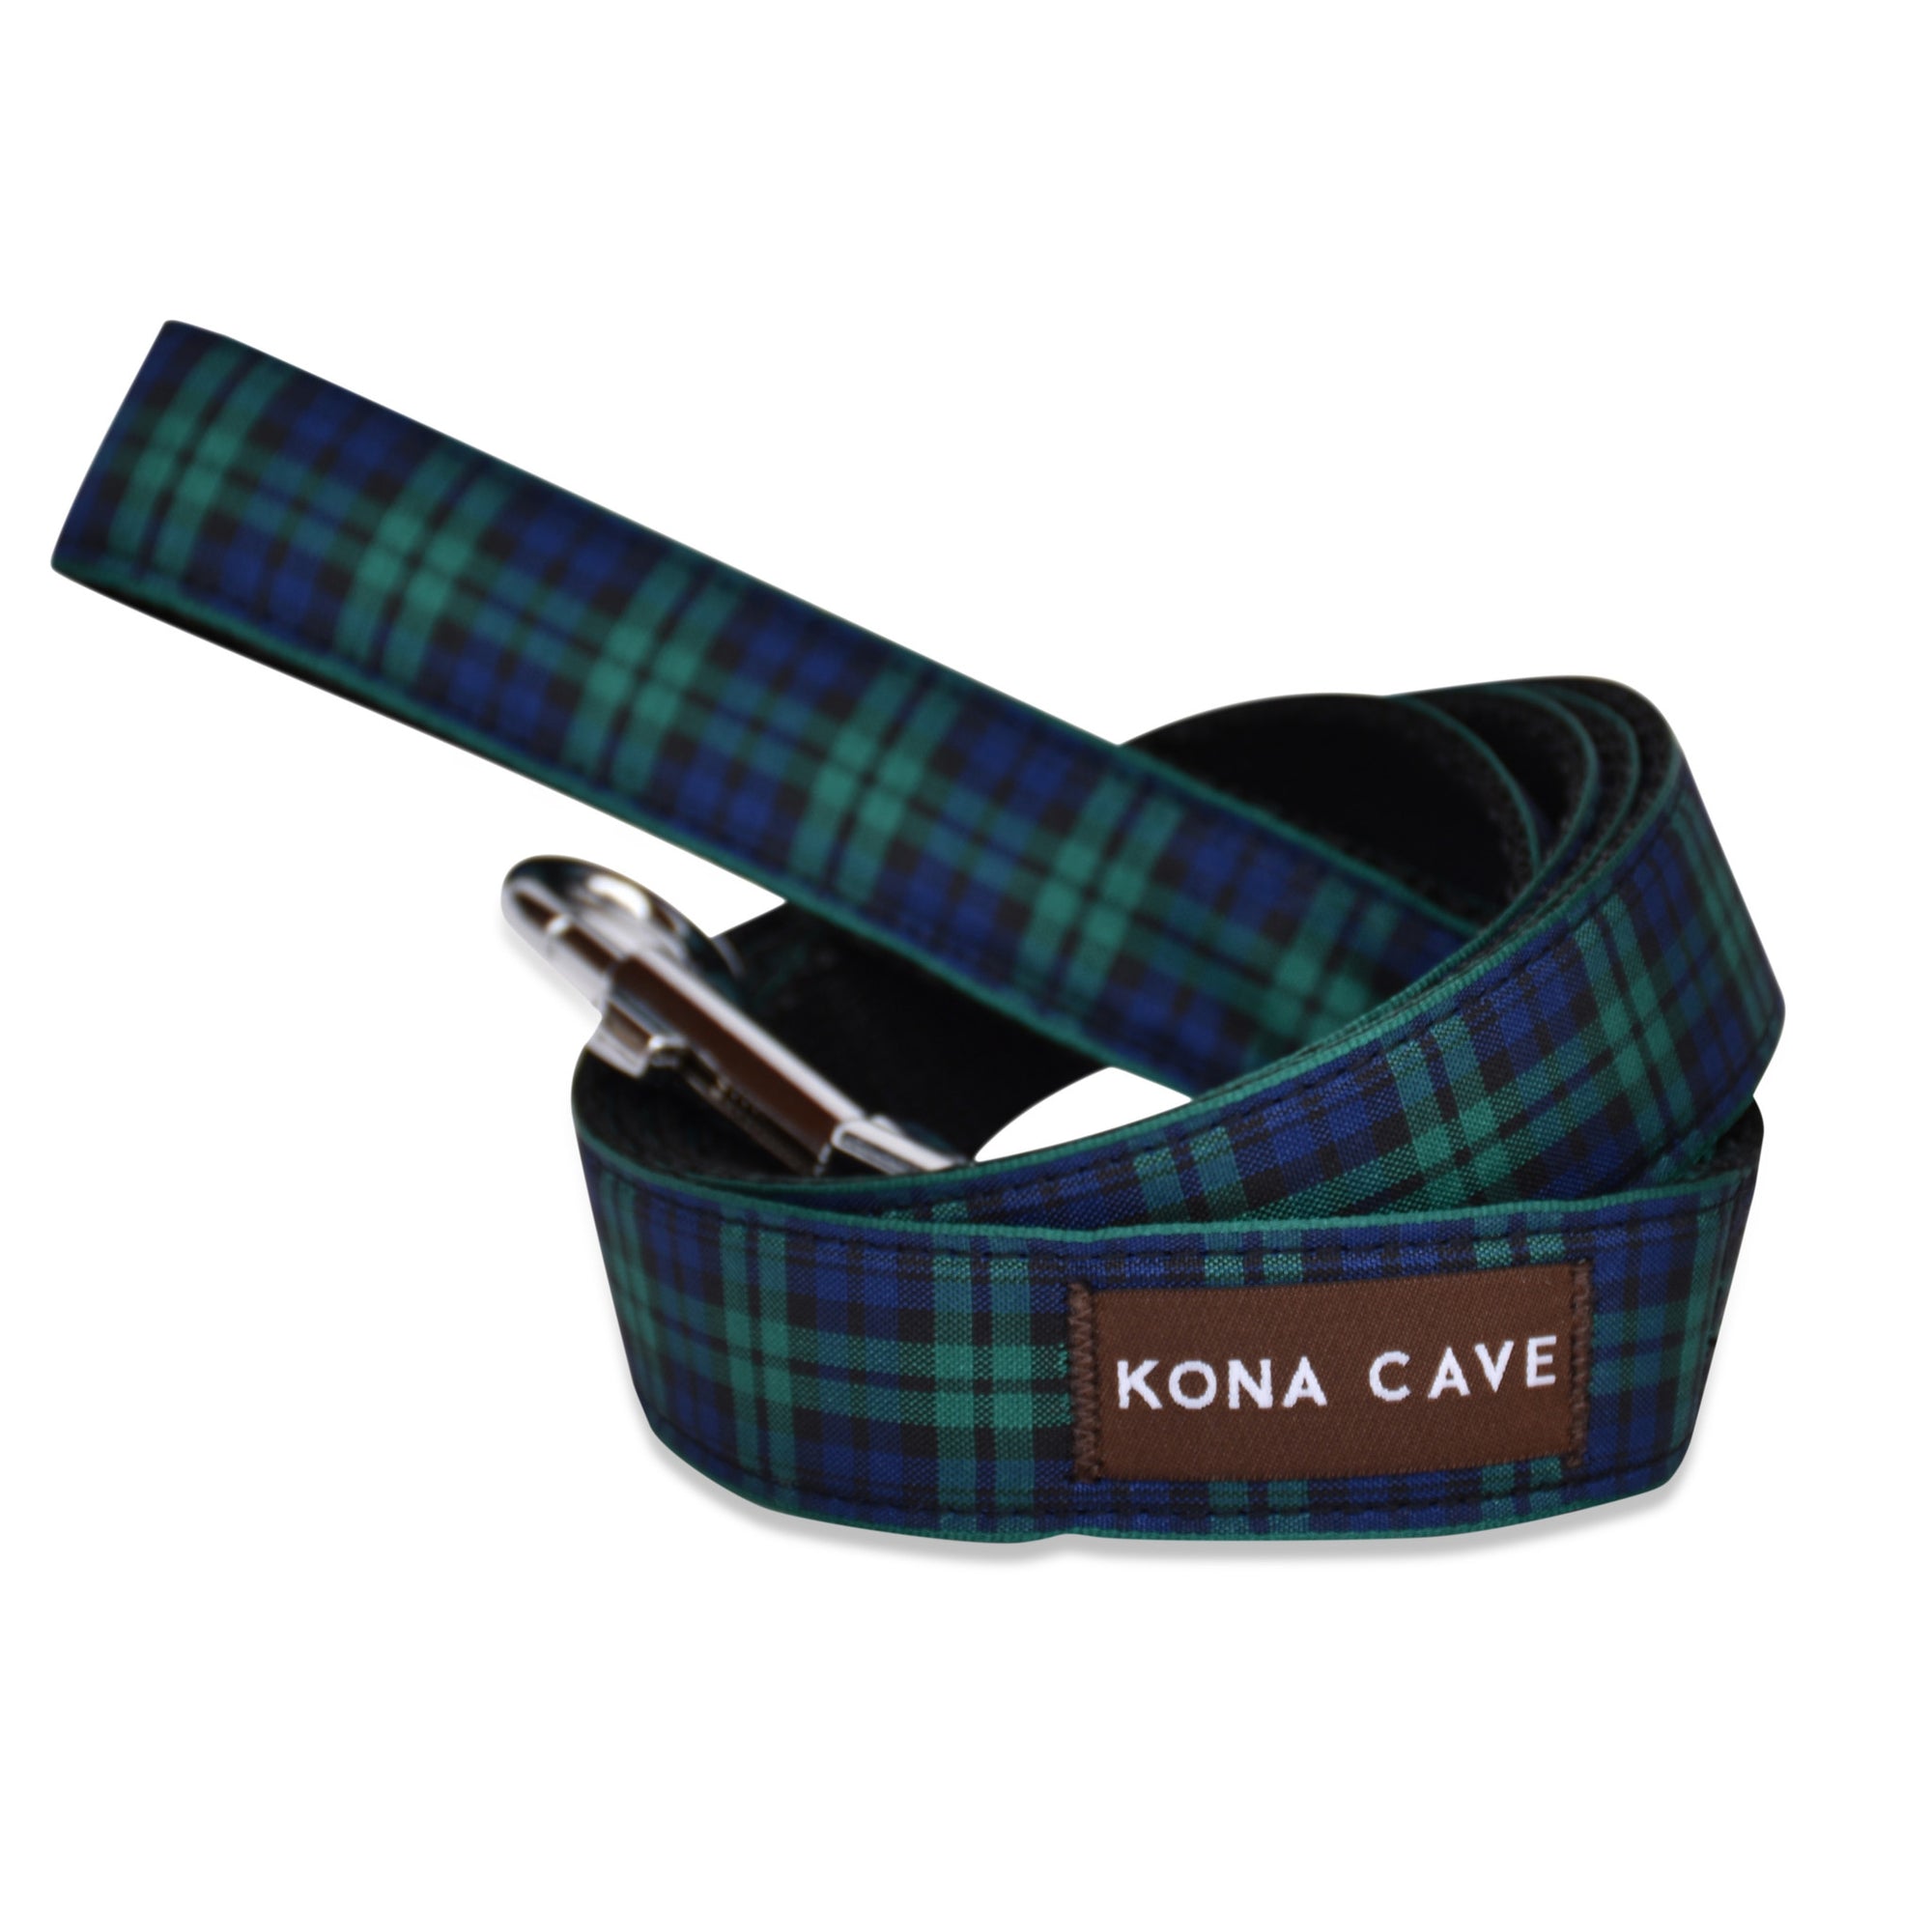 KONA CAVE® Adjustable dog leash. Authentic Blackwatch tartan ribbon in green and bblue on blue nylon leash.  Extra Clip and D-rings to shorten leash or attach poop bags, etc. Light weight and comfortable.